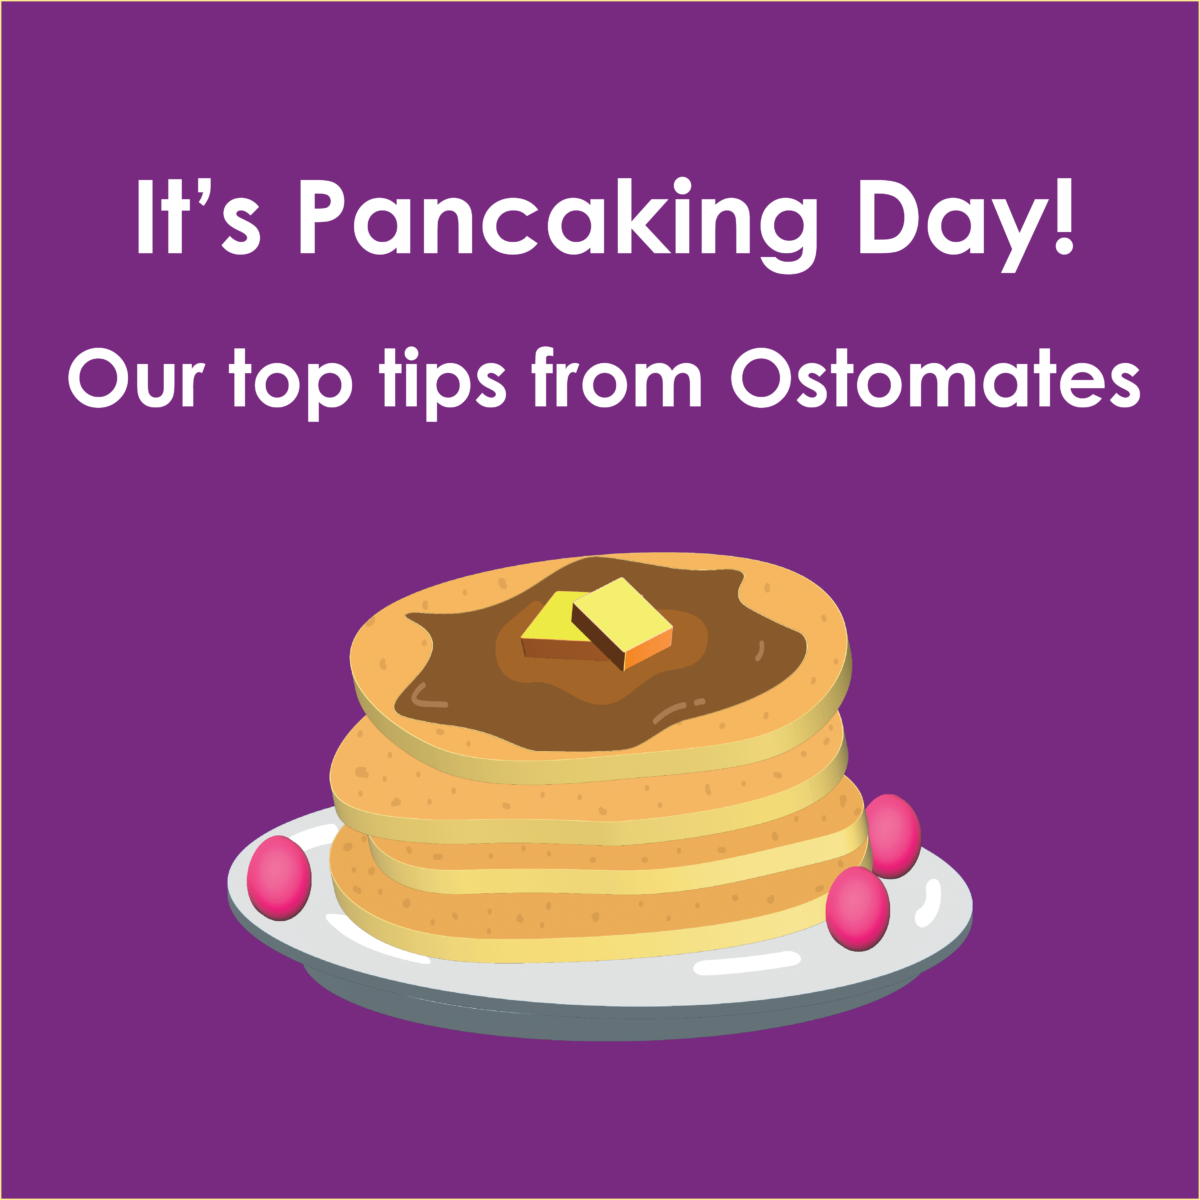 All your pancaking advice